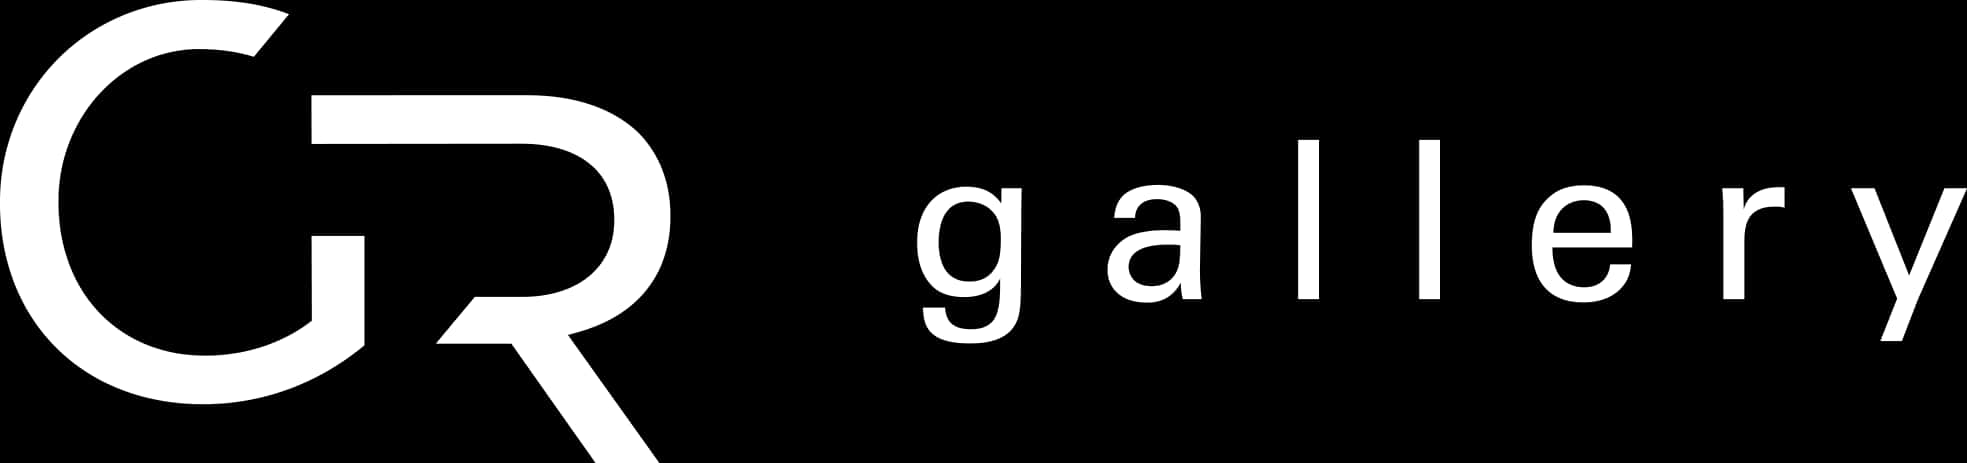 C R Gallery Logo Blackand White PNG